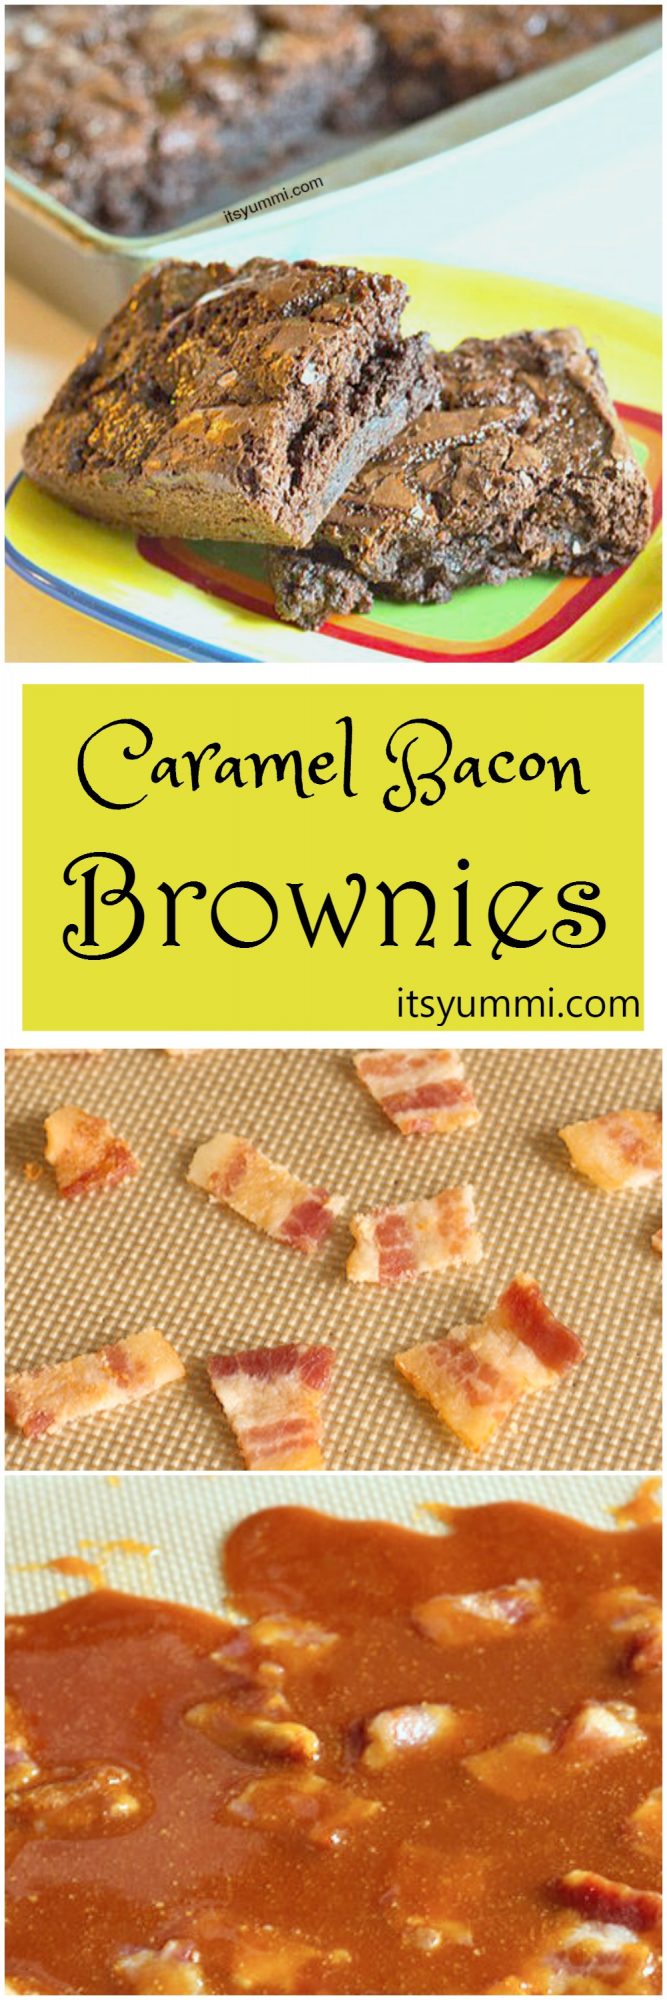 caramel brownies with bacon photo collage